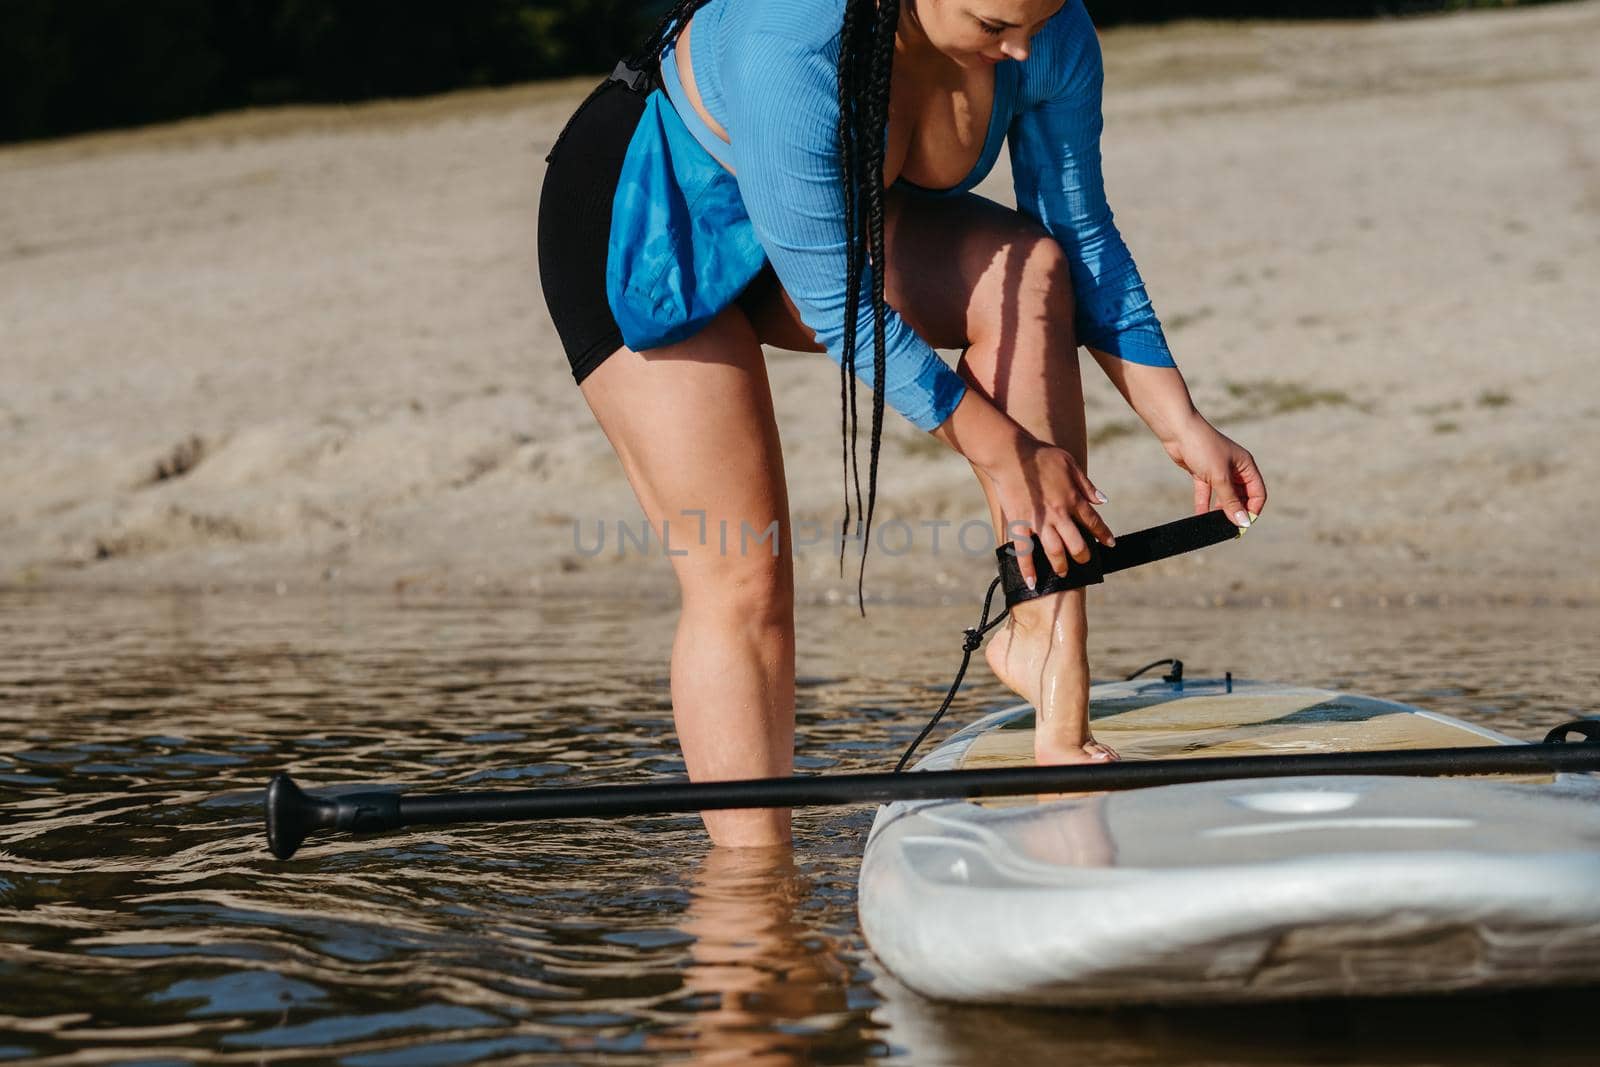 Woman Attaching Insurance Cable of Sup to Her Leg, Preparing to Swim on Board